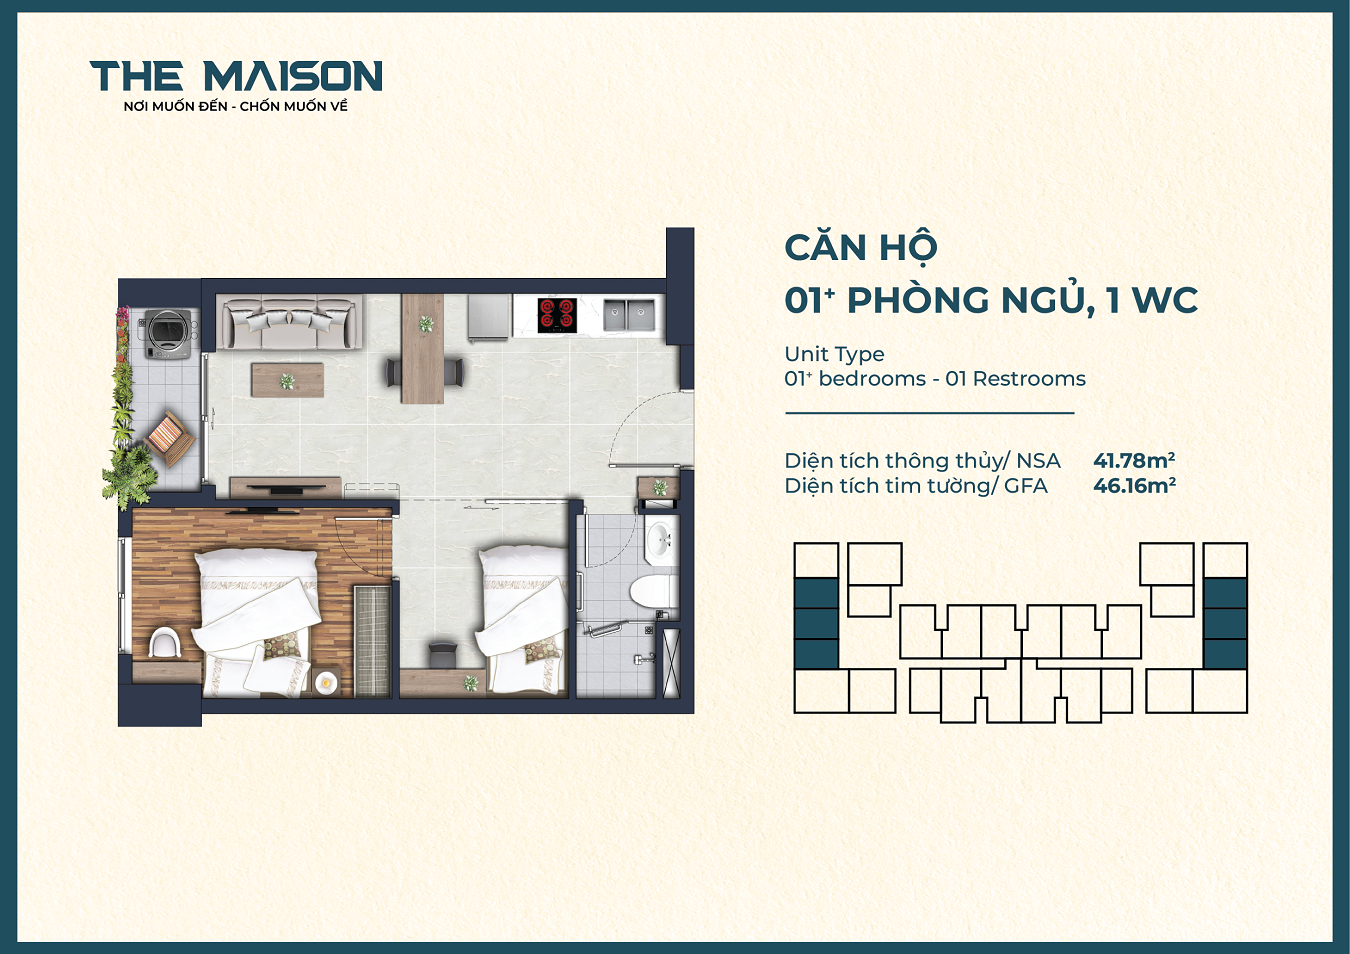 THE MAISON_MB CAN HO_46.16m